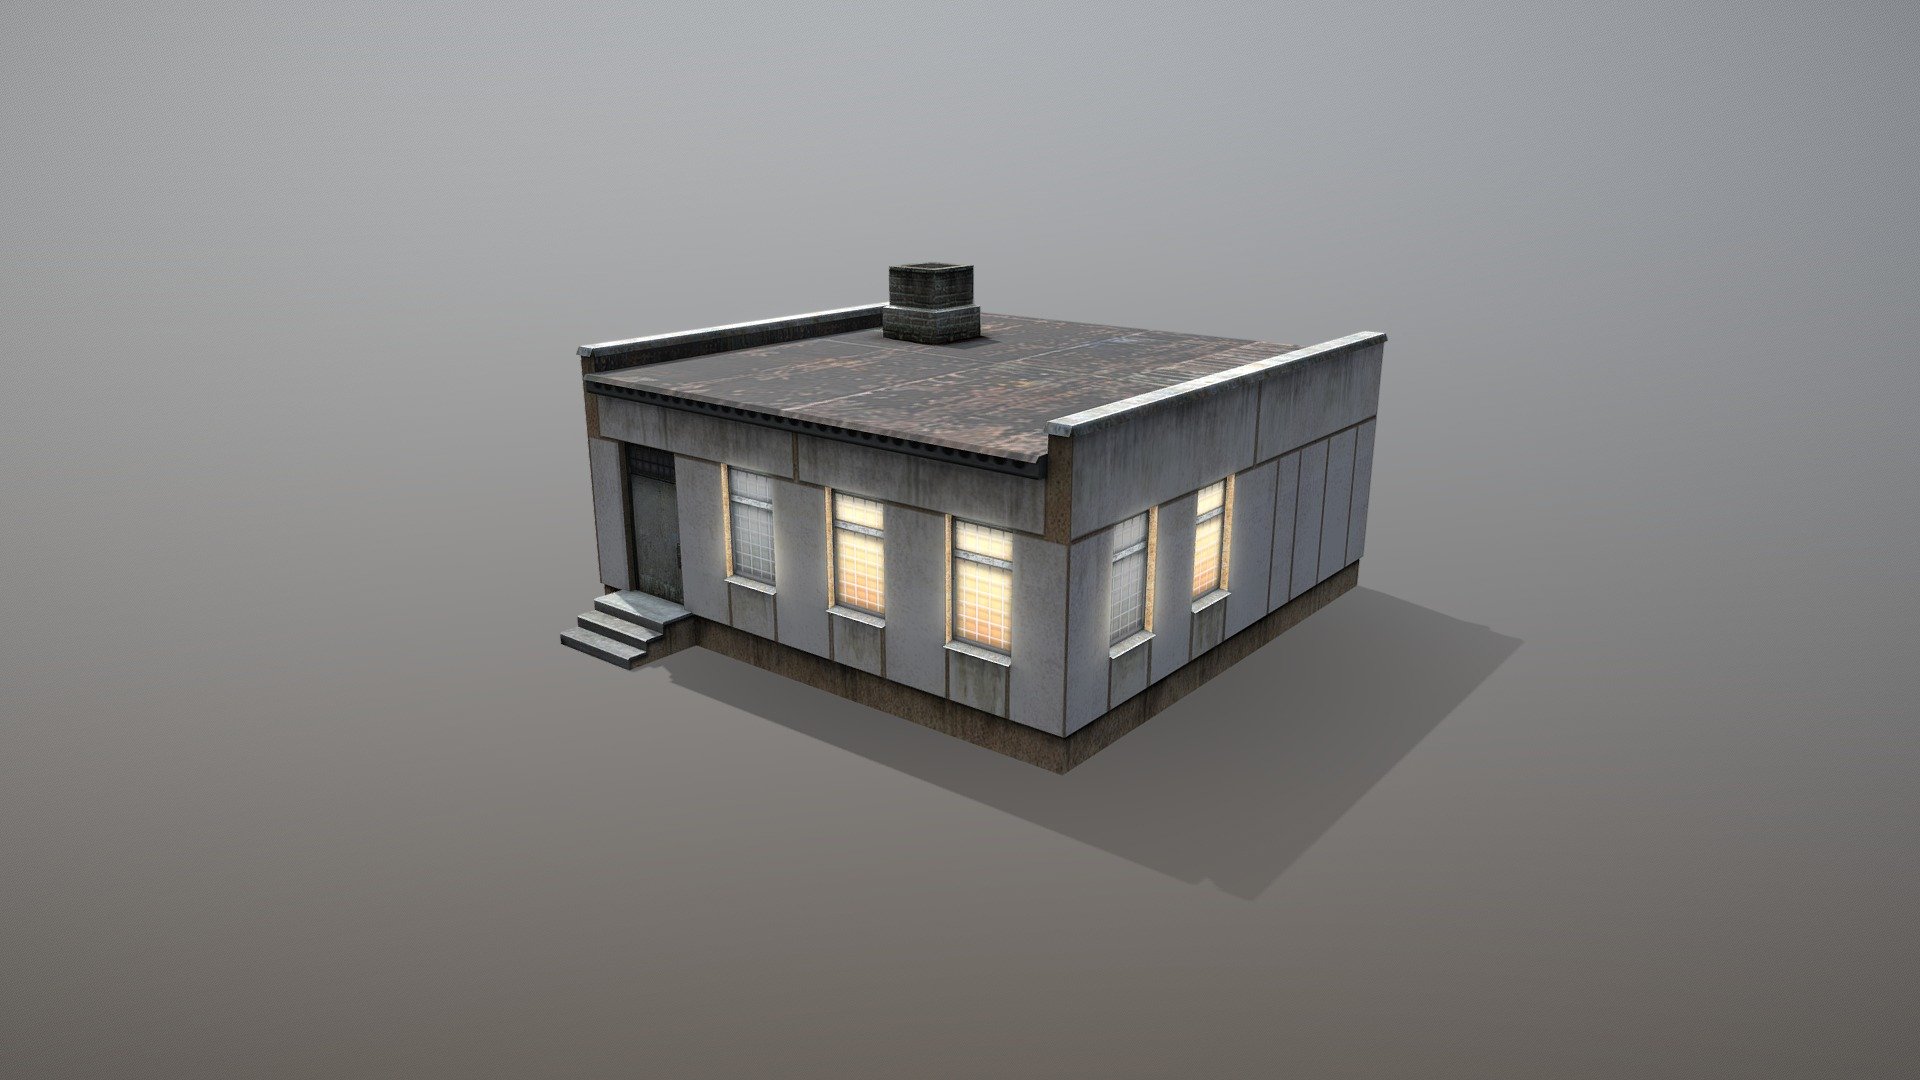 Railway Building RW_BlockPost




LOD0 - (triangles 314) / (points 202)

Low-poly 3D model Railway Building




Textures for PBR shader (Albedo, AmbietOcclusion, Gloss, Specular, Emission) they may be used with Unity3D, Unreal Engine. 

All pictures (previews) REALTIME rendering

Textures for WINTER


Textures for NIGHT




Textures:




RW_BlockPost_Albedo.png       - 1024x512

RW_BlockPost_AmbientOcclusion.png - 1024x512

RW_BlockPost_Gloss.png        - 1024x512

RW_BlockPost_Specular.png     - 1024x512


RW_BlockPost_Emission.png     - 1024x512  




Pack for WINTER





If you have questions about my models or need any kind of help, feel free to contact me and i'll do my best to help you 3d model